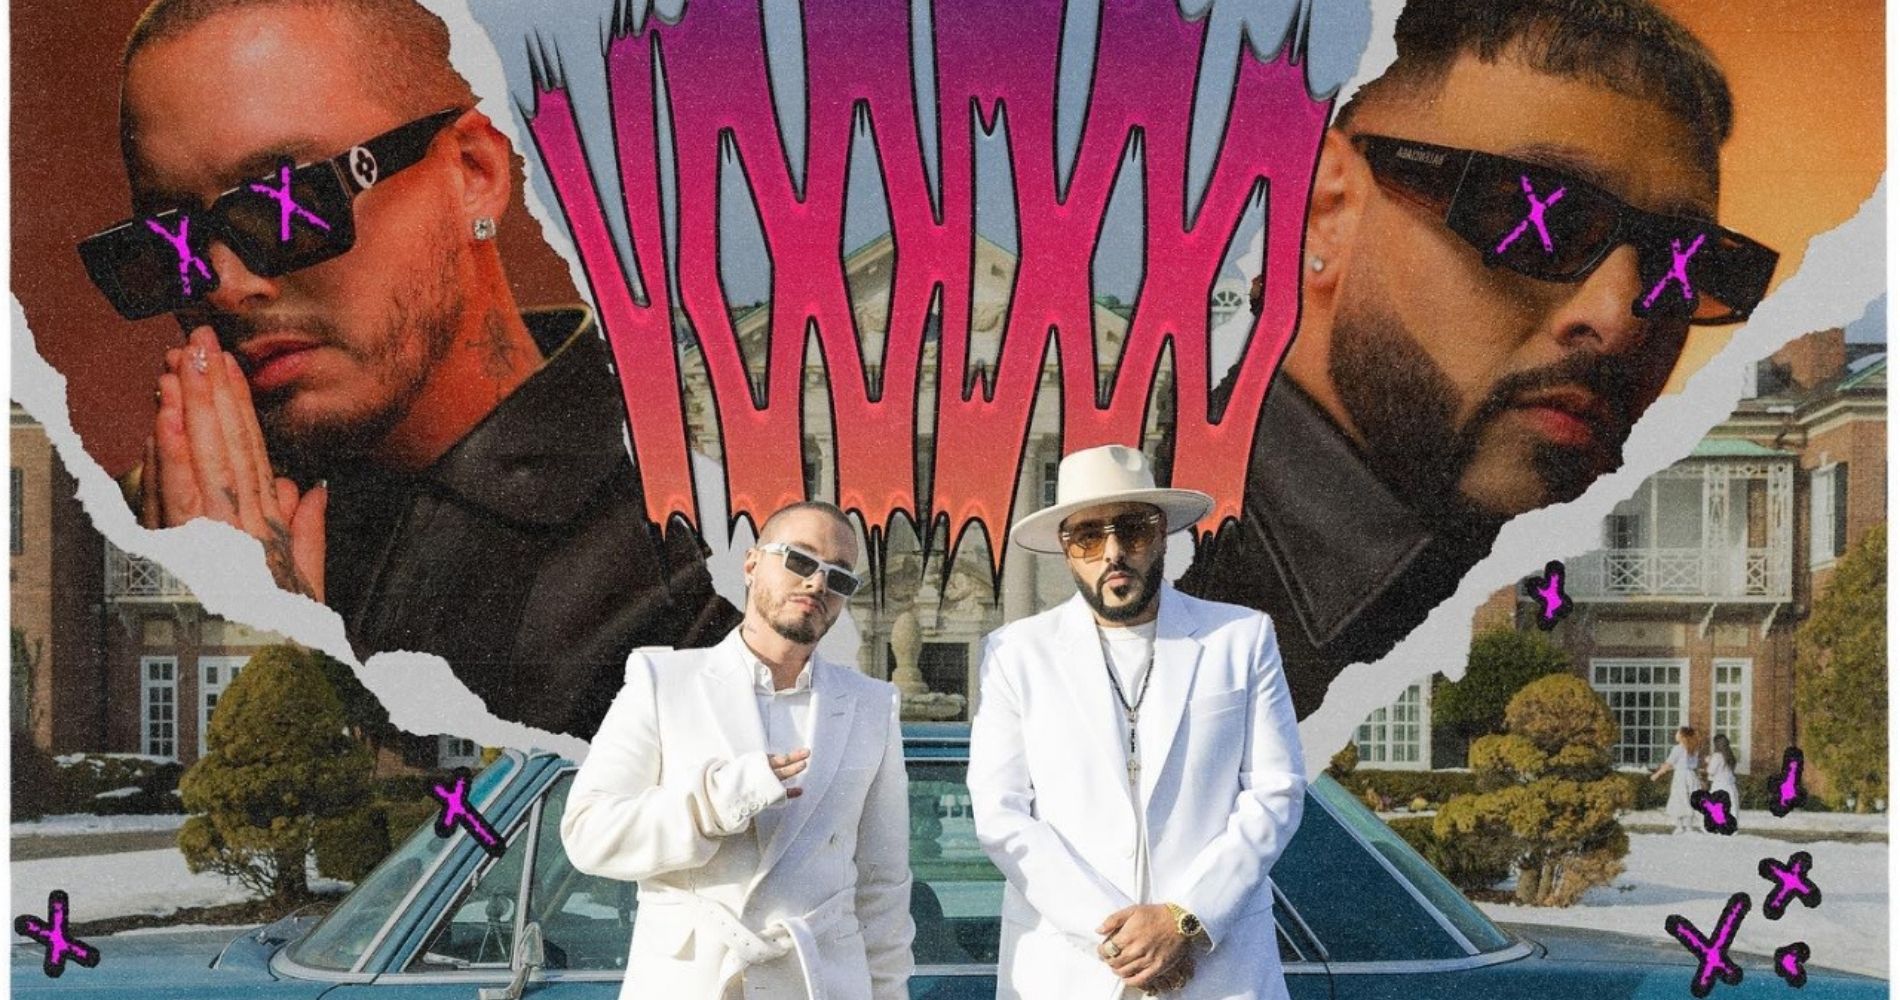 'Voodoo' marks the first proper collaboration between Badshah and Latinx